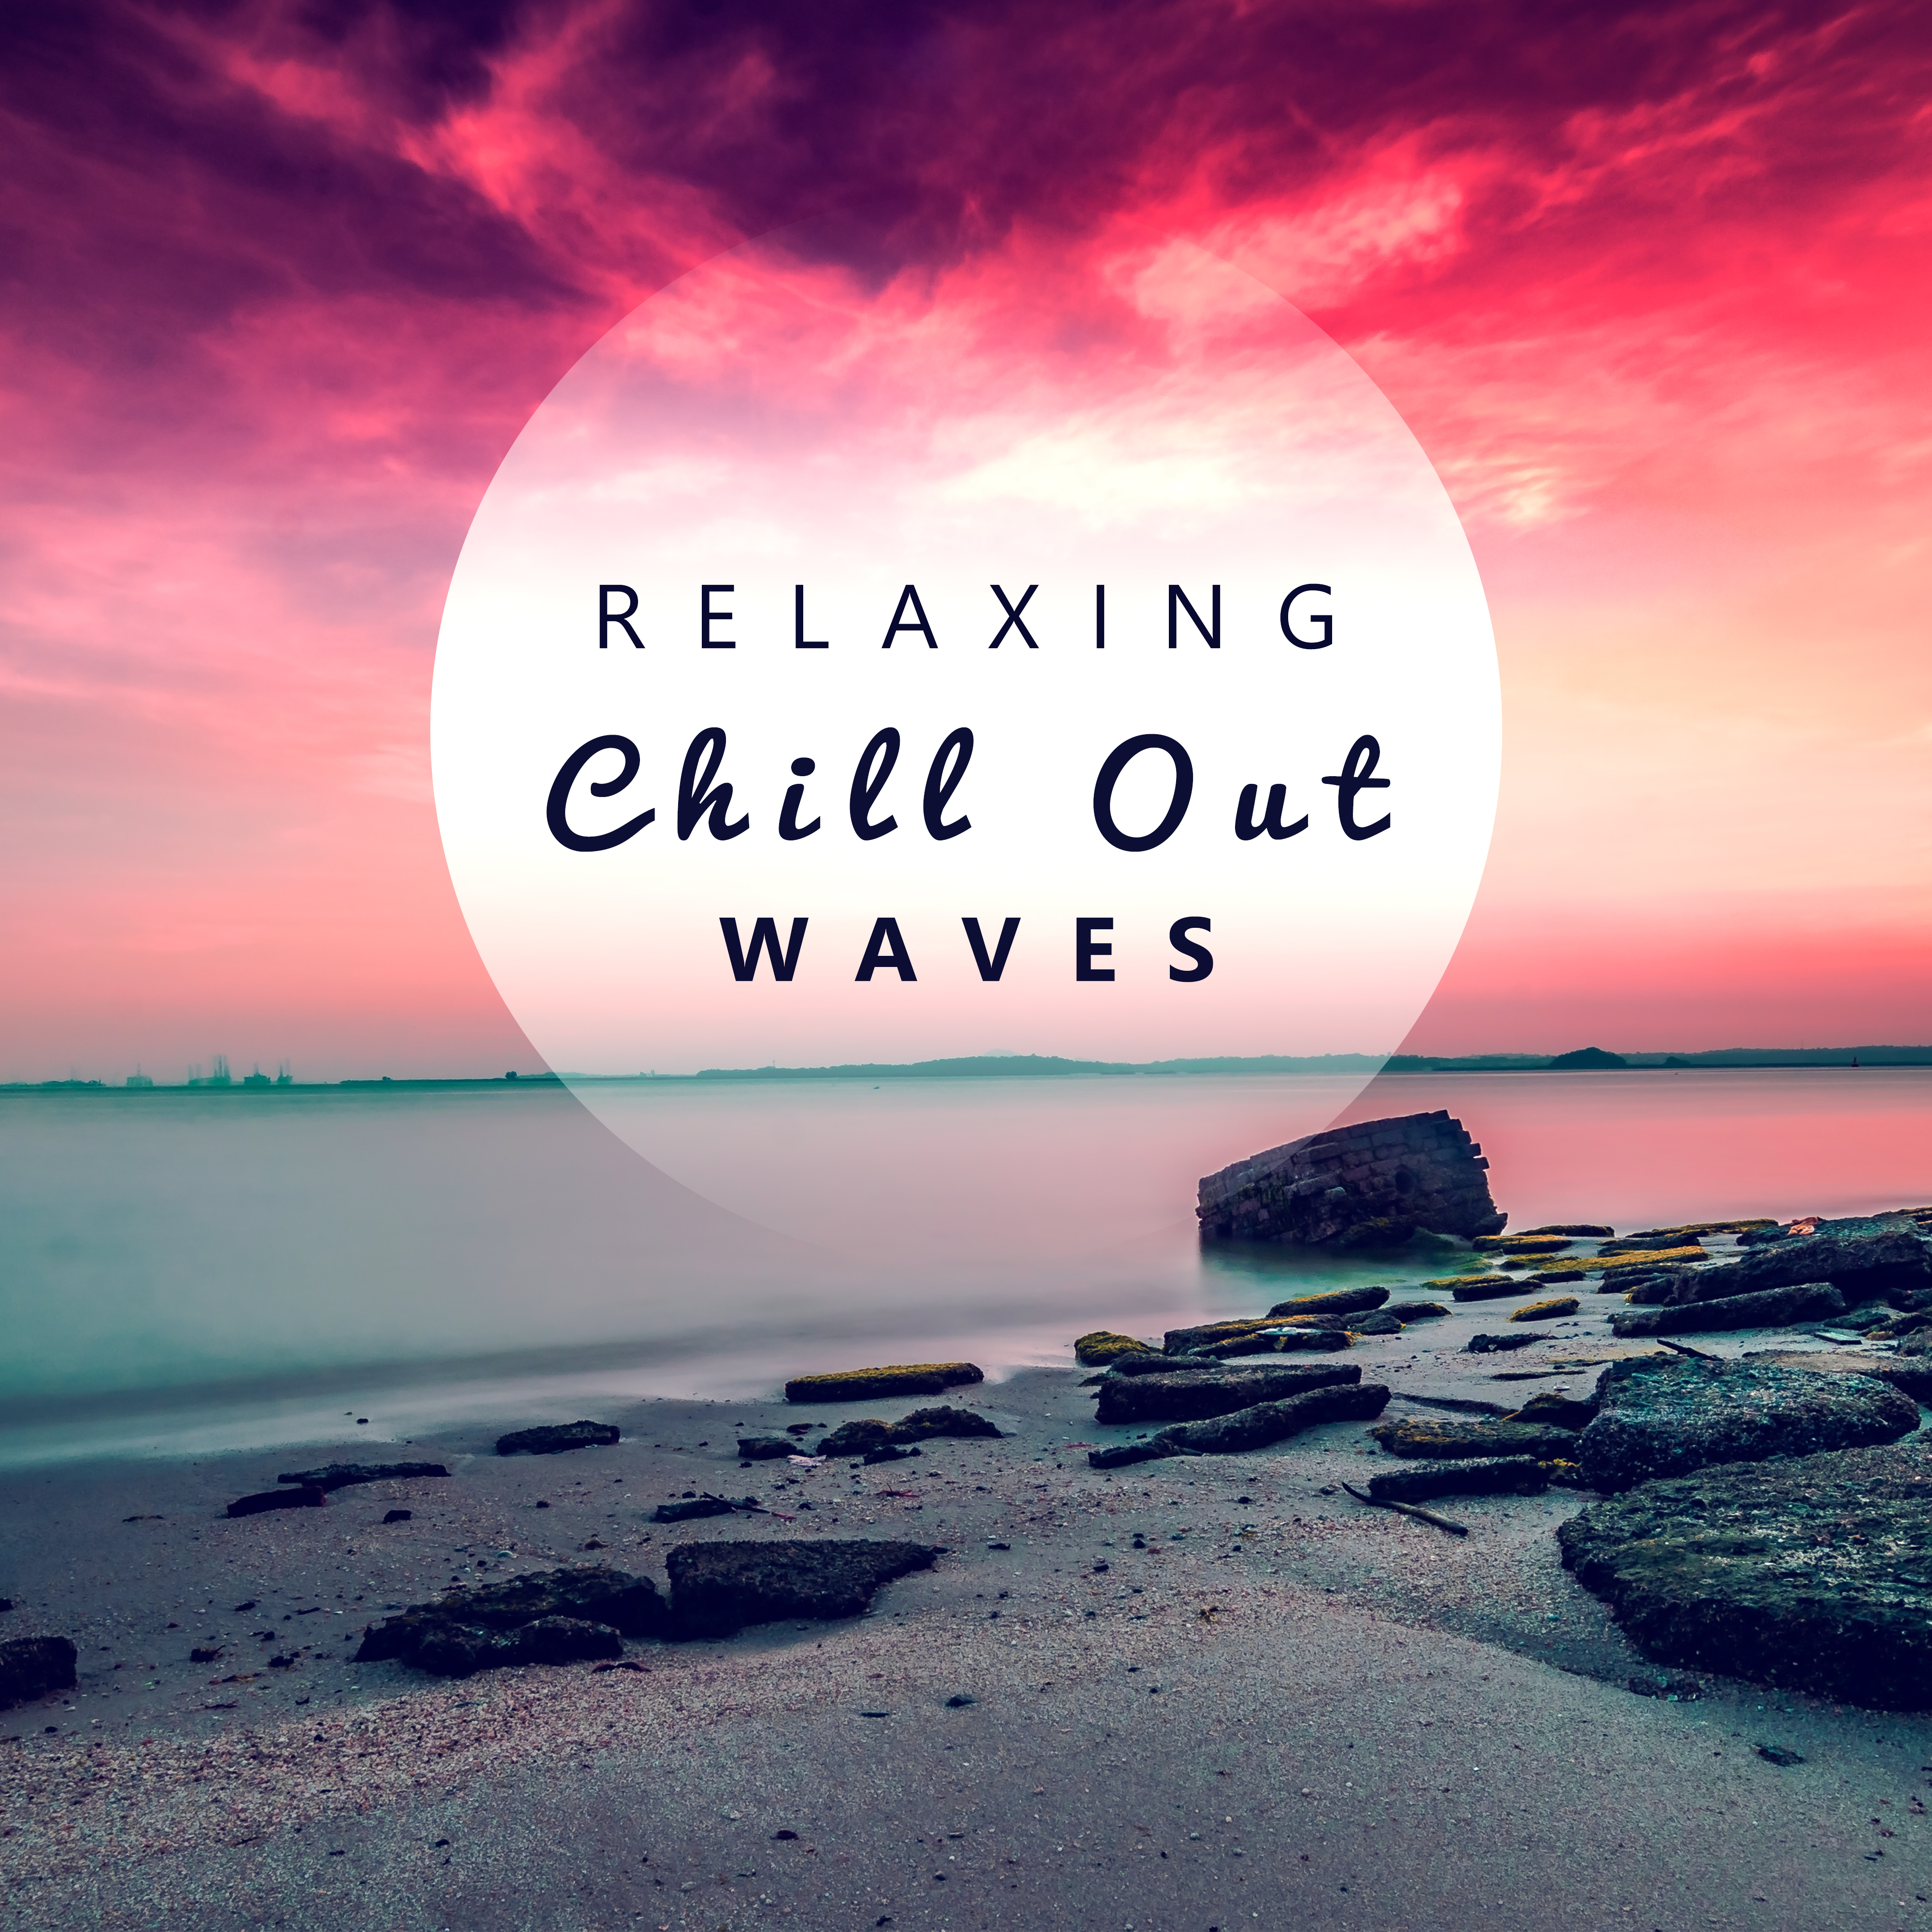 Relaxing Chill Out Waves  Calm Down  Relax, Stress Relief, Peaceful Chill Out Sounds, Music for Summertime